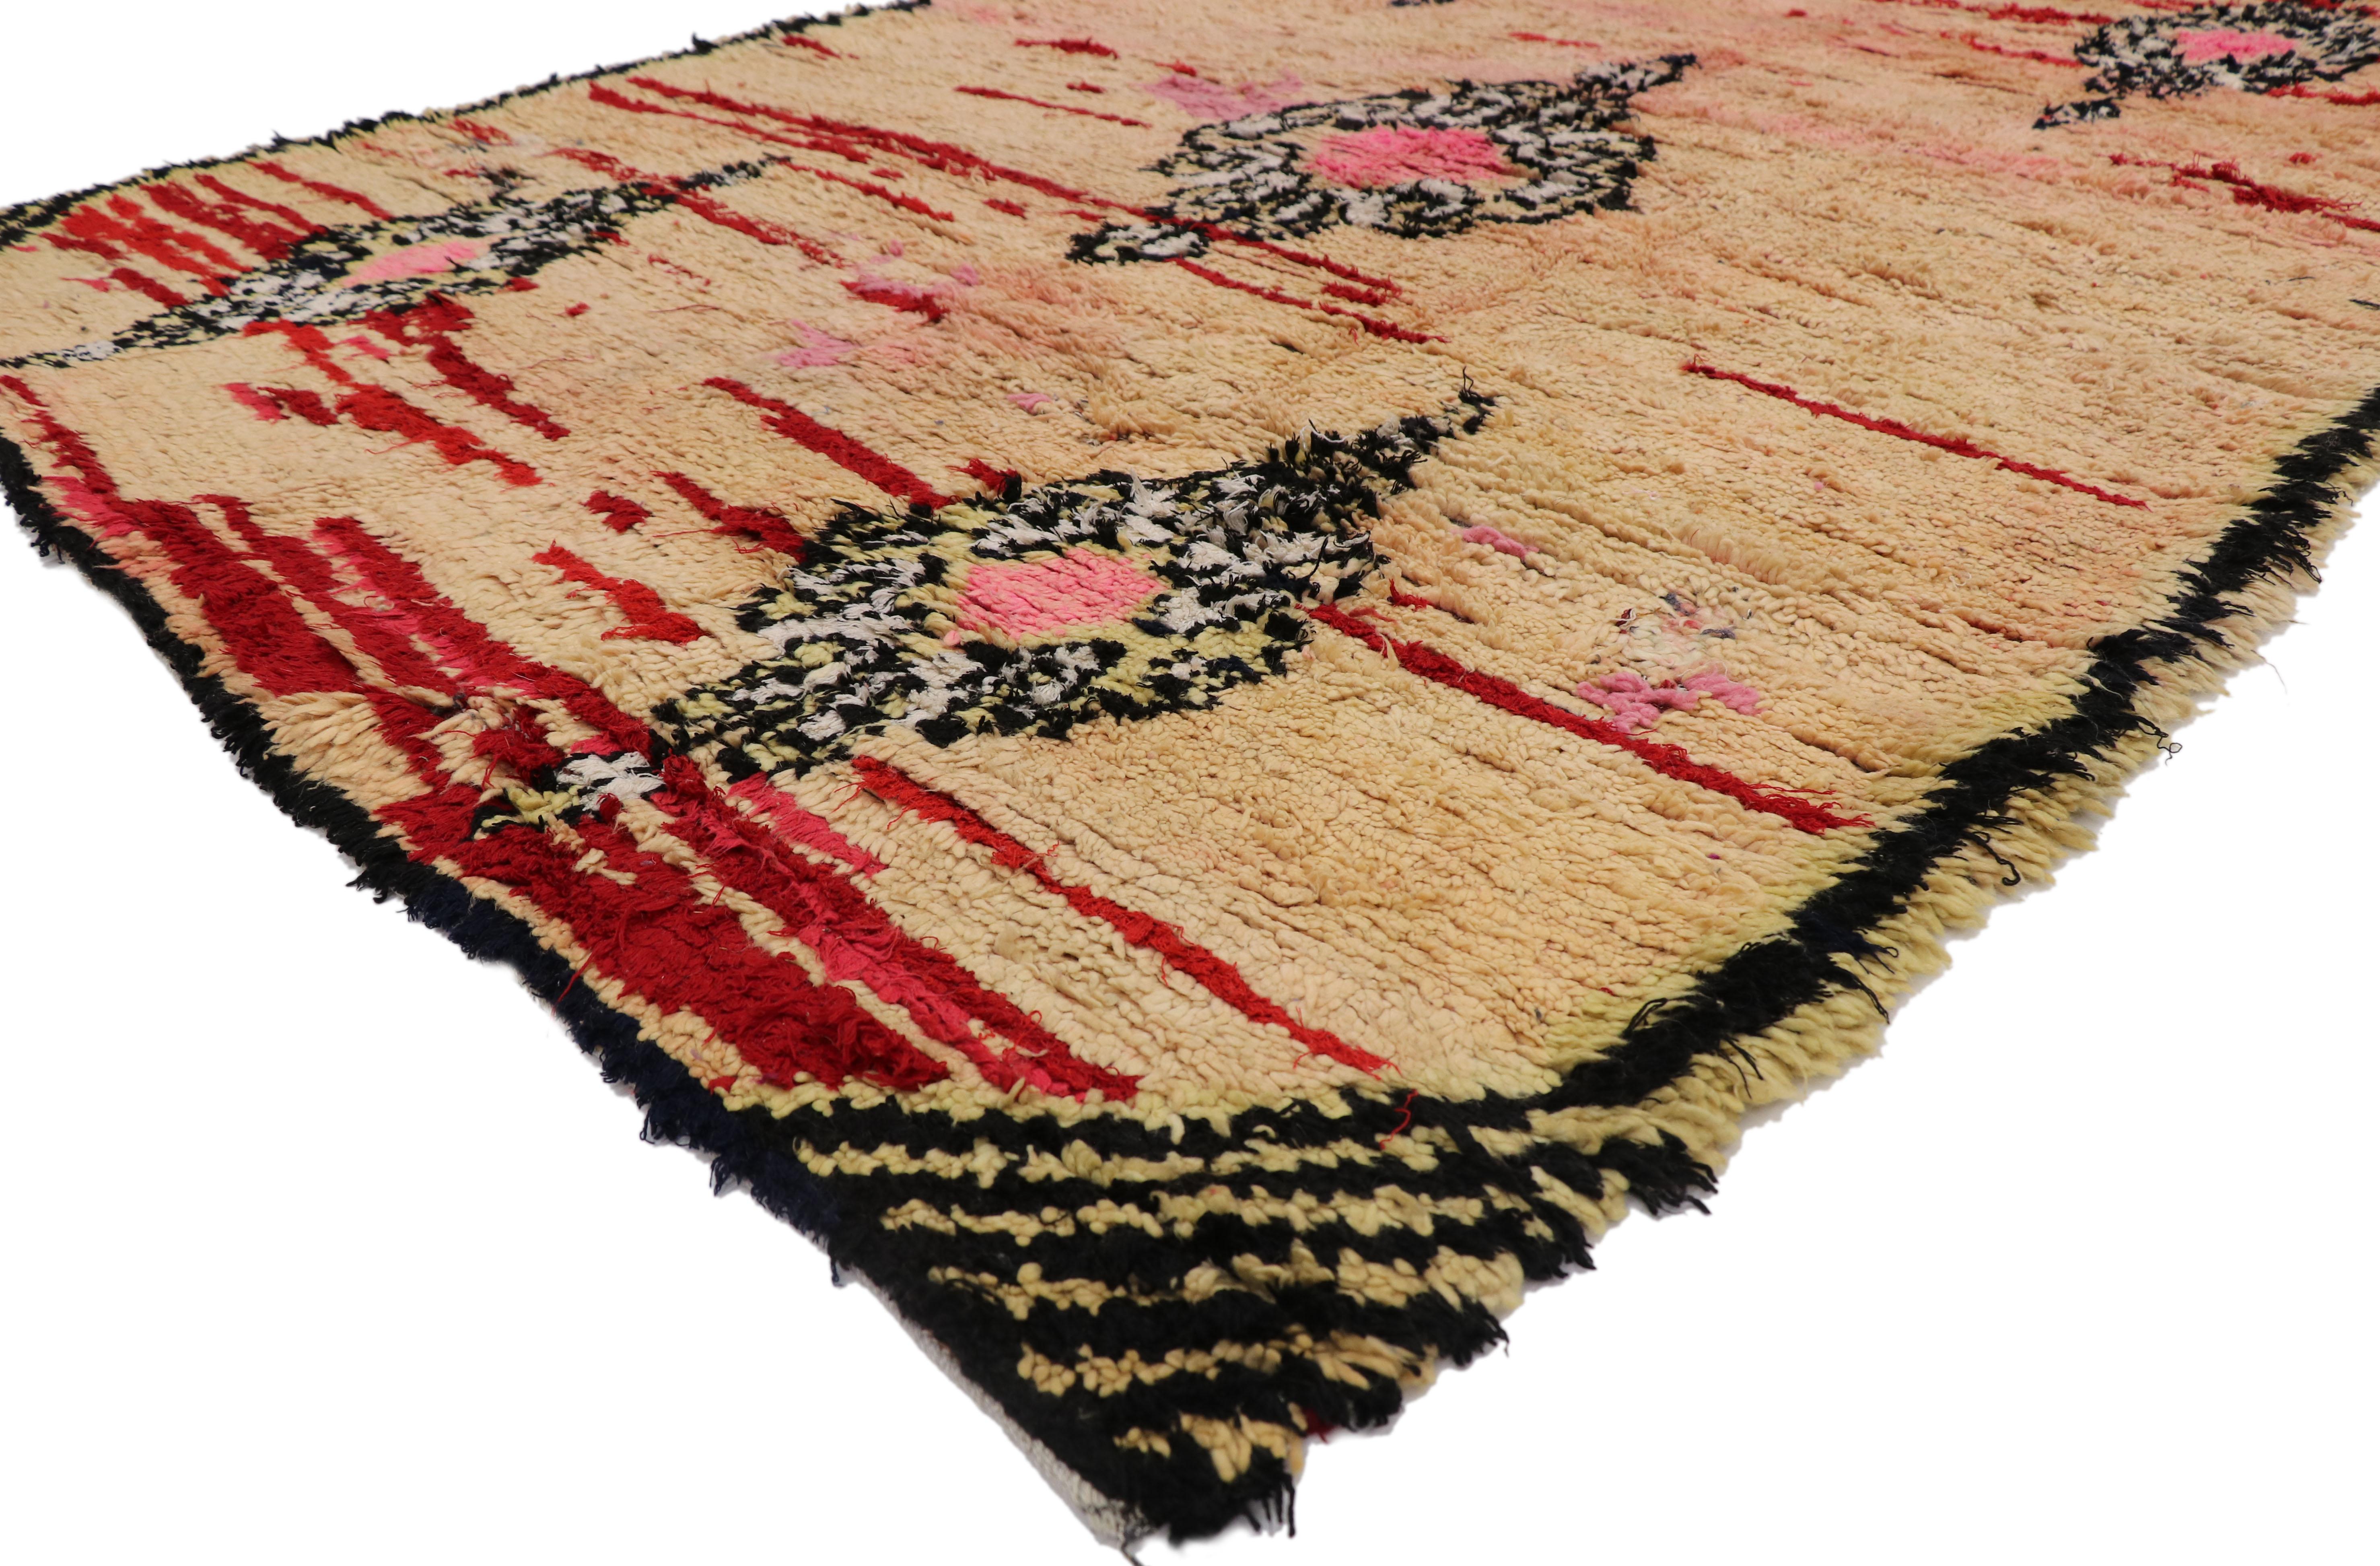 21422 Vintage Moroccan Rug, 06'03 x 08'04.
Wabi-Sabi meets laid-back luxury in this hand-knotted wool vintage Moroccan rug. The intrinsic tribal design and gradated earth-tone colors woven into this piece work together creating a boho chic